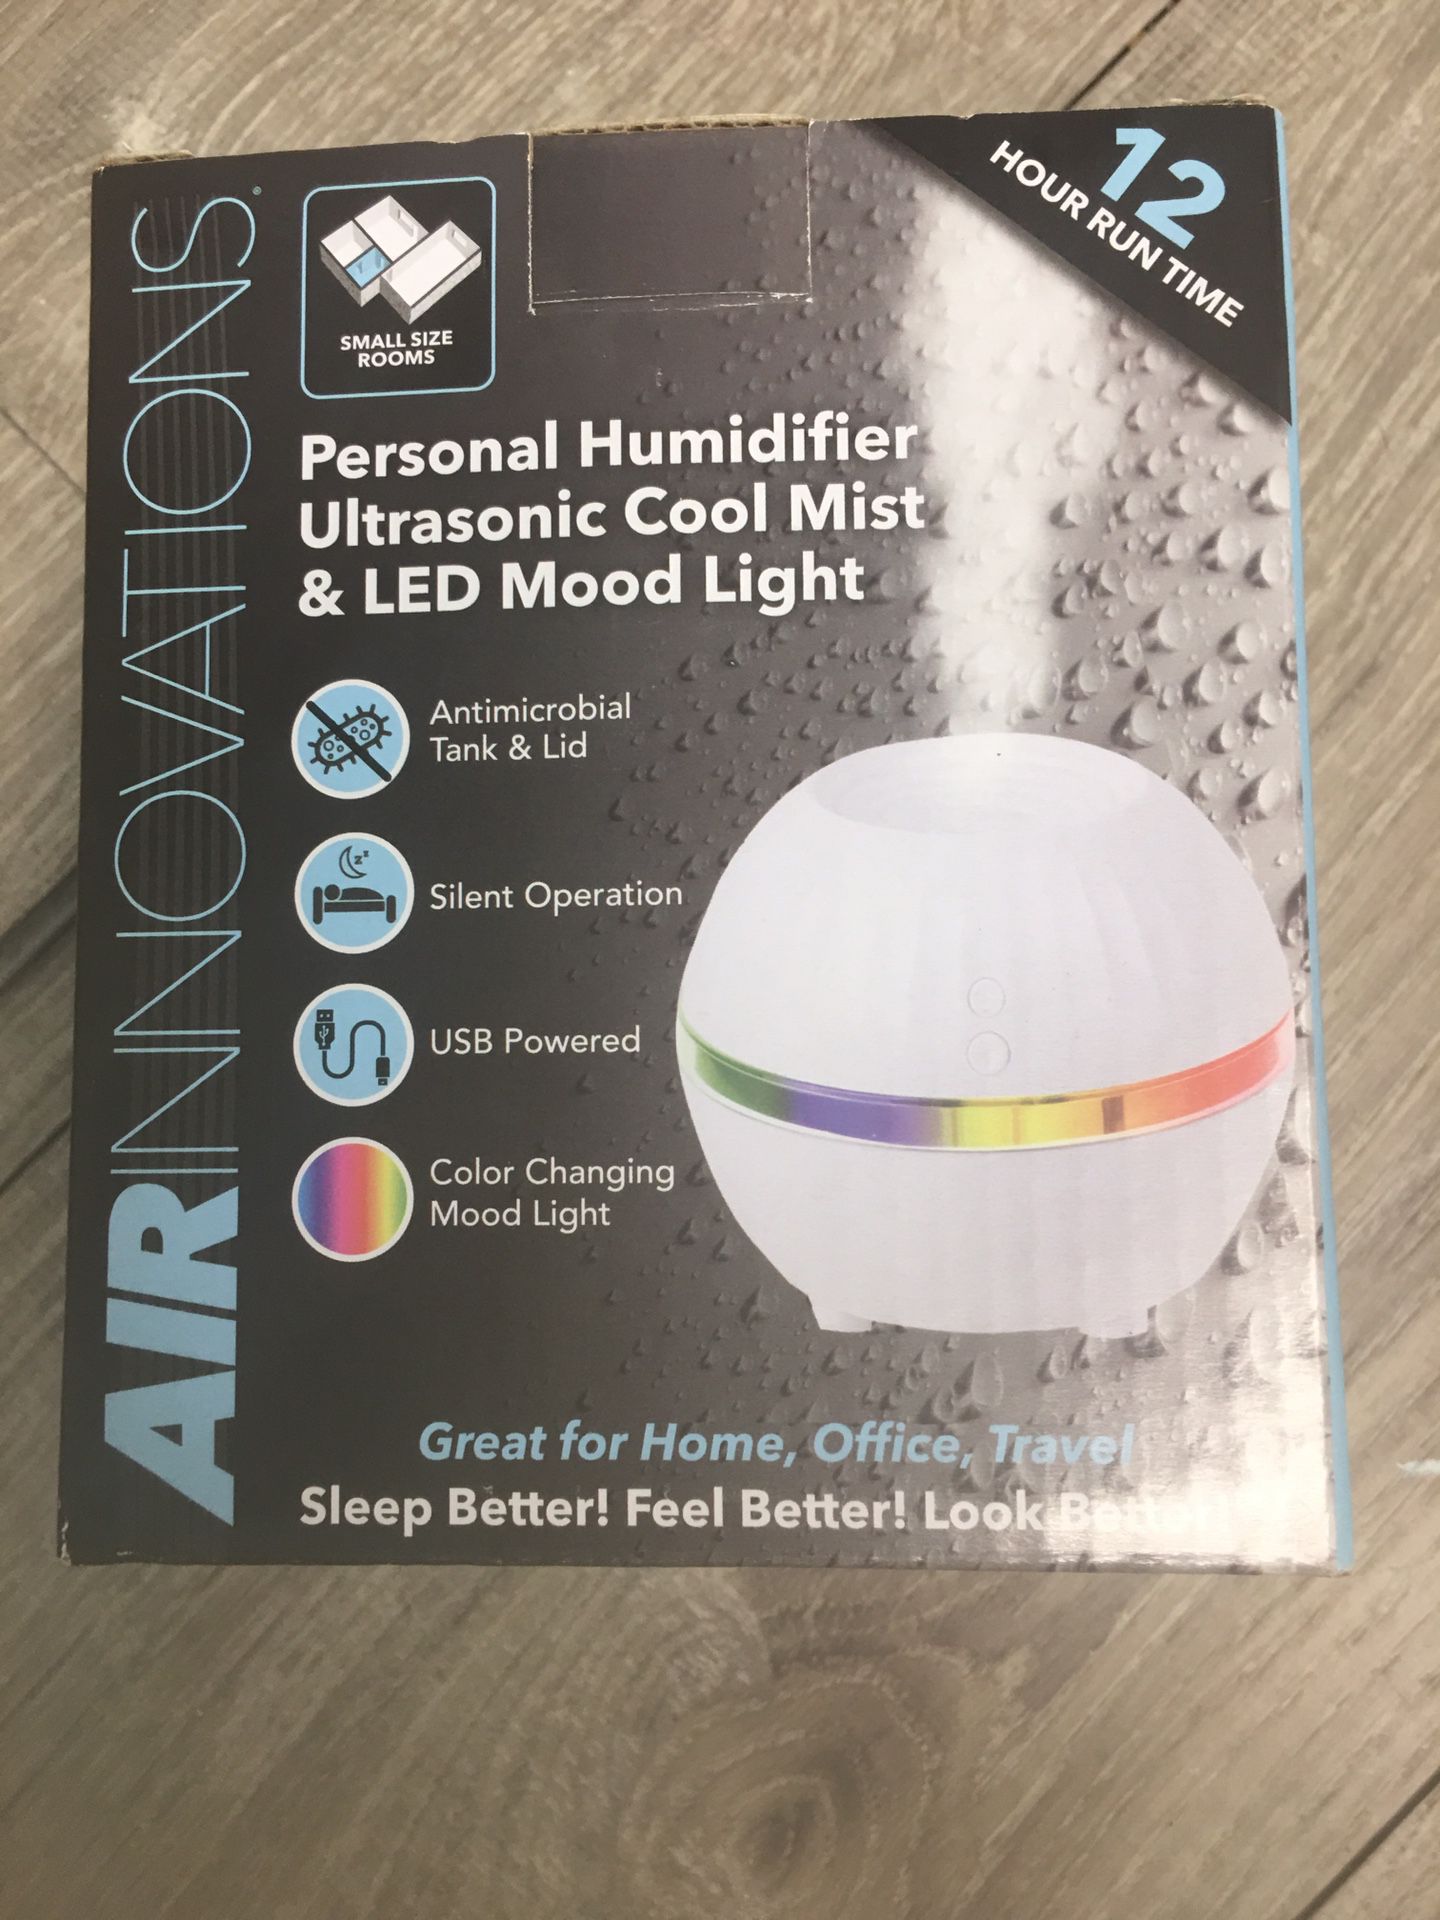 Personal Humidifier Ultrasonic Cool Mist and LED Mood Light